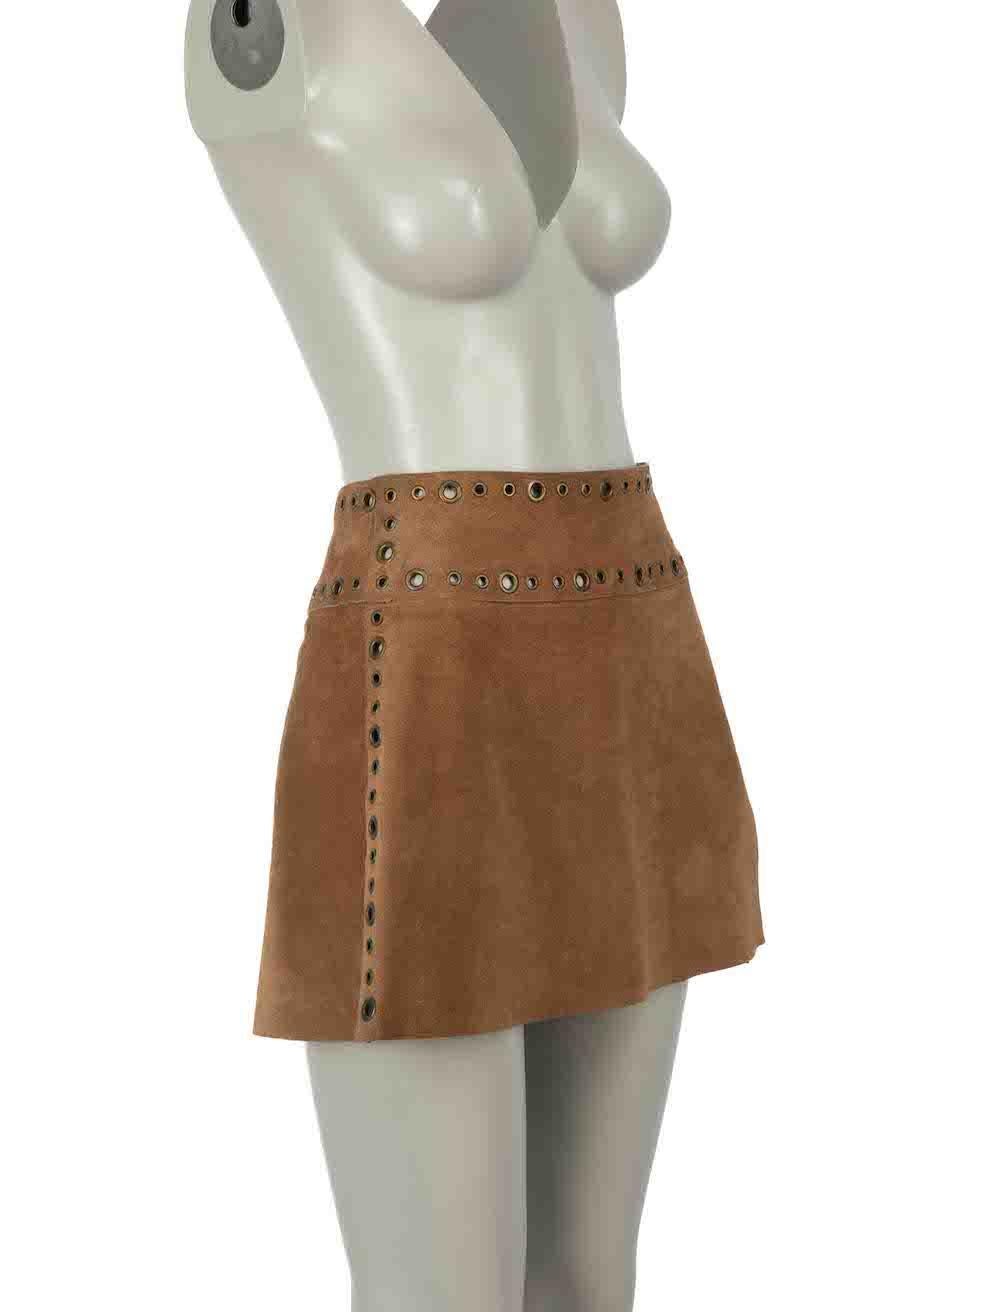 CONDITION is Very good. Minimal wear to skirt is evident. Minimal wear to suede where tarnished eyelets mark is visible to the centre front and back on this used Dolce & Gabbana designer resale item.
 
 Details
 Vintage
 Brown
 Suede
 Skirt
 A-line
